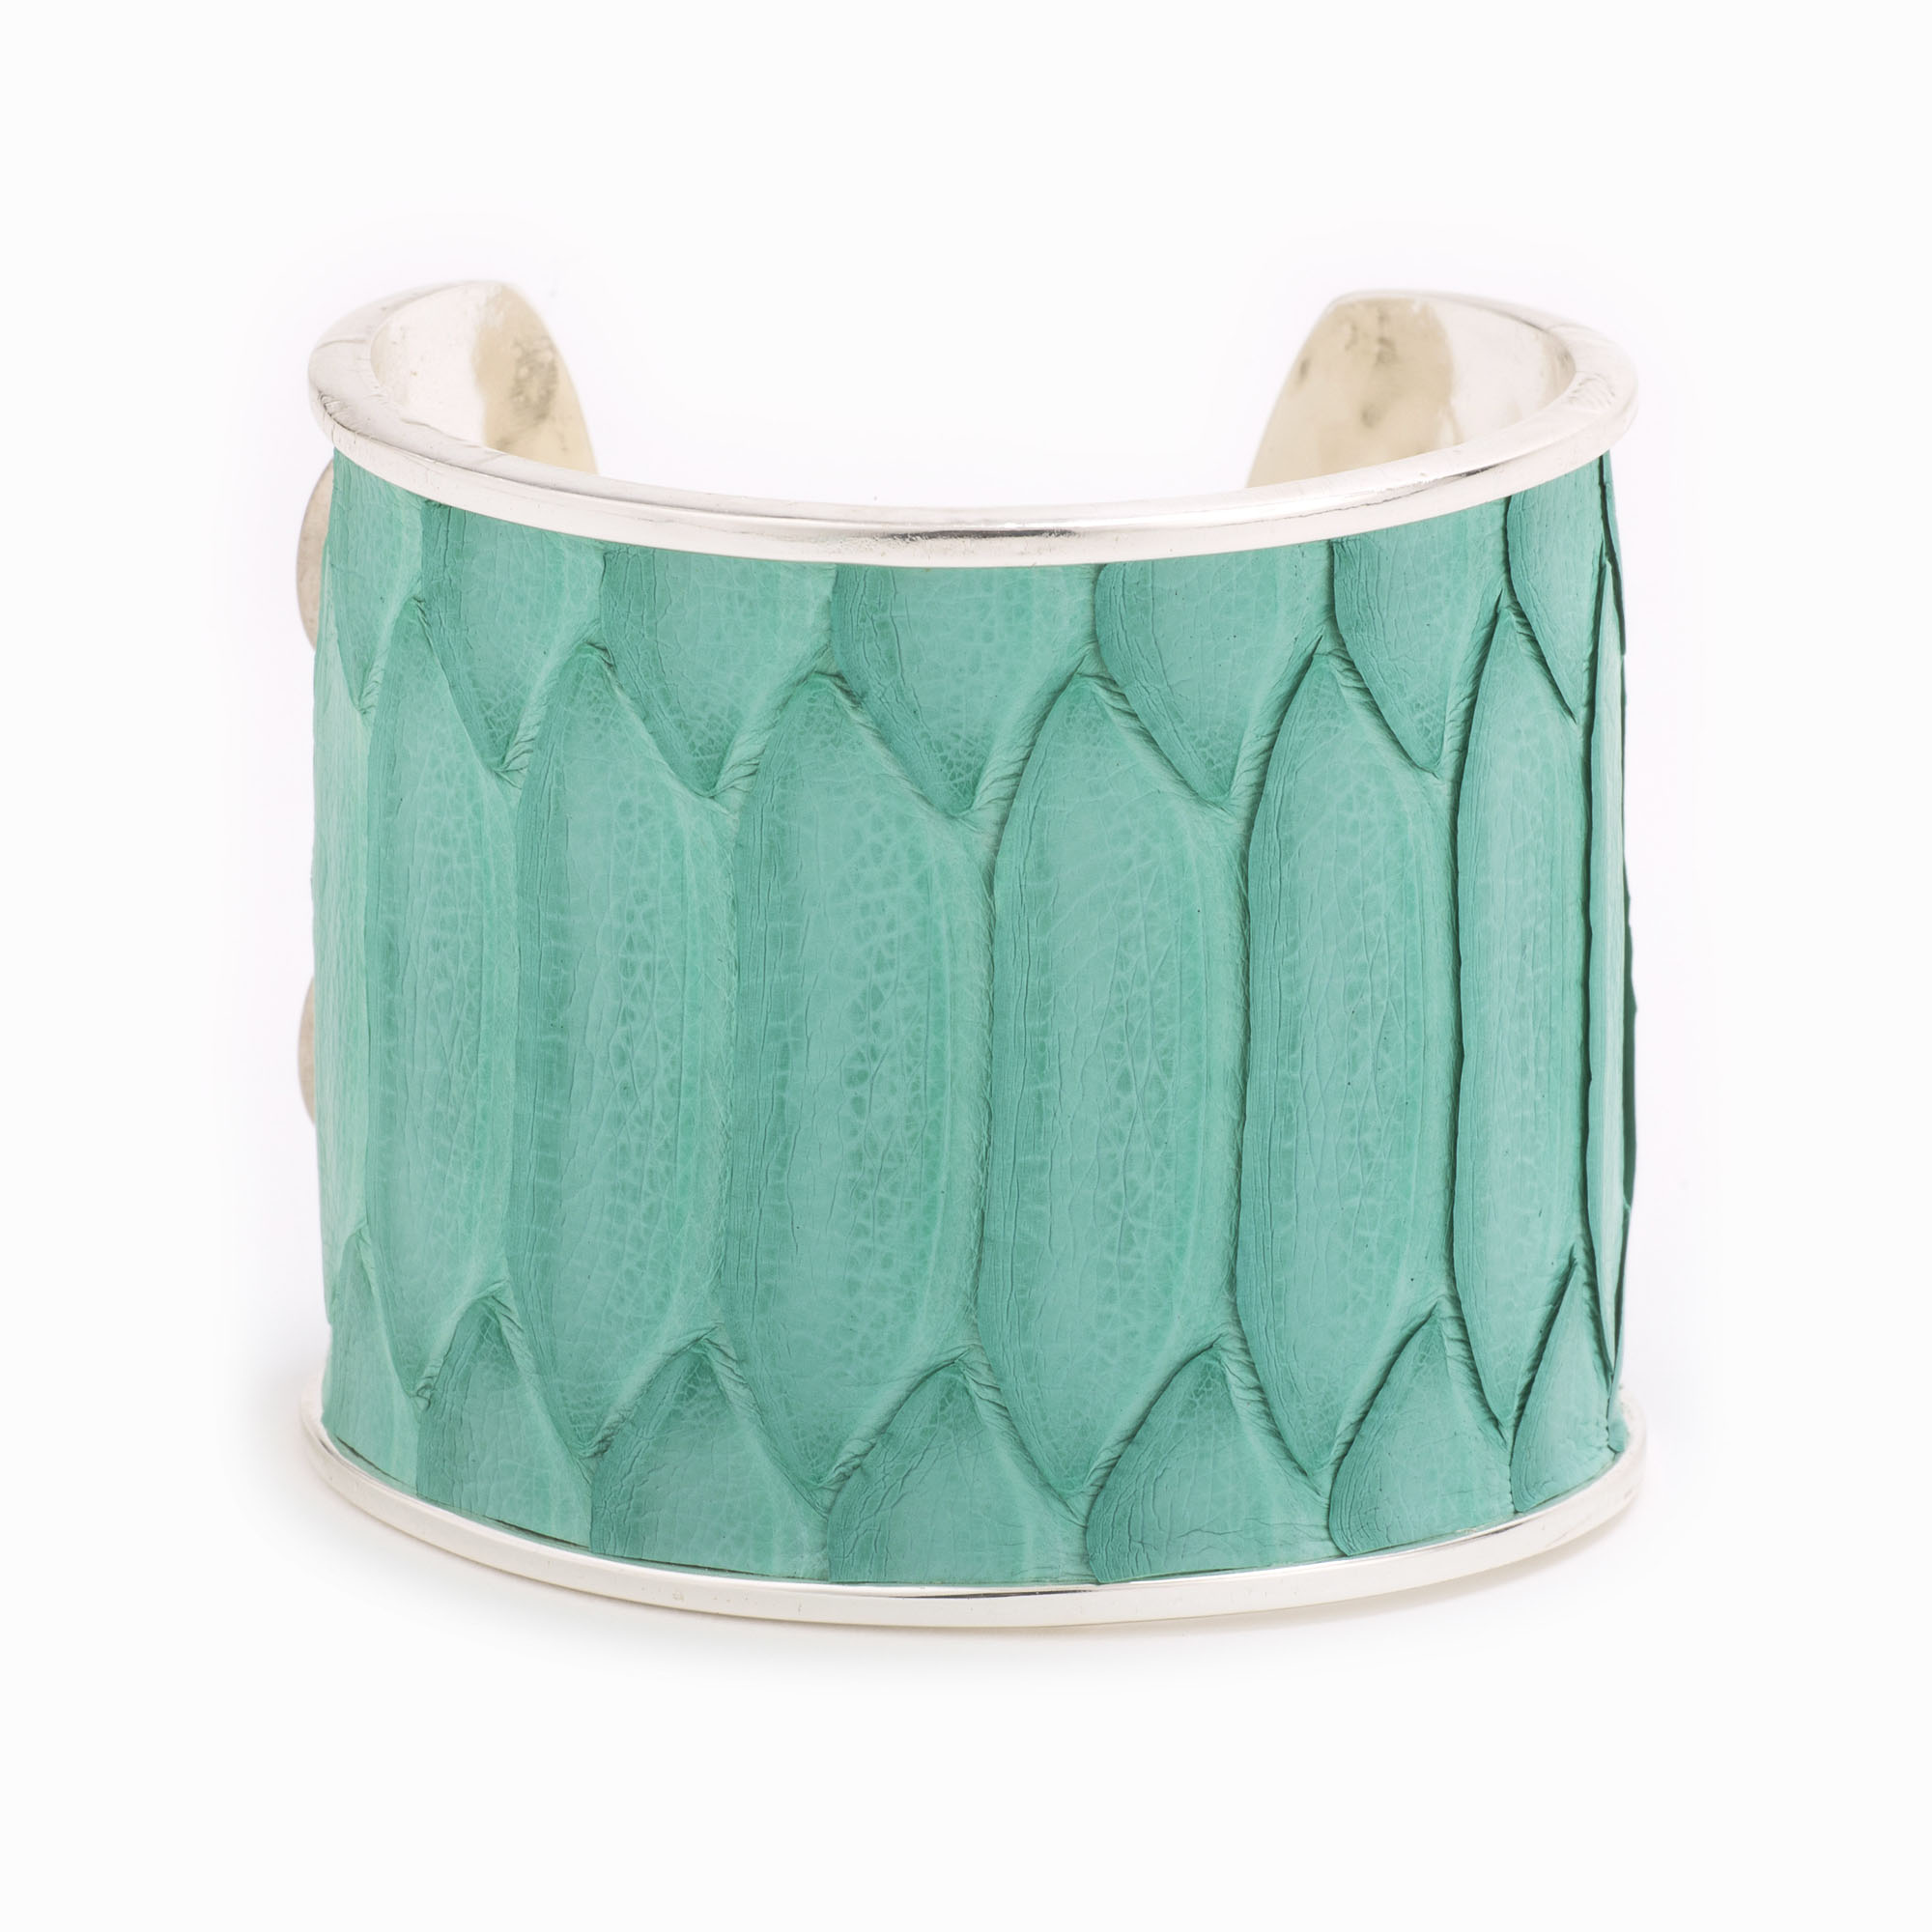 Featured image for “Large Turquoise Silver Cuff”